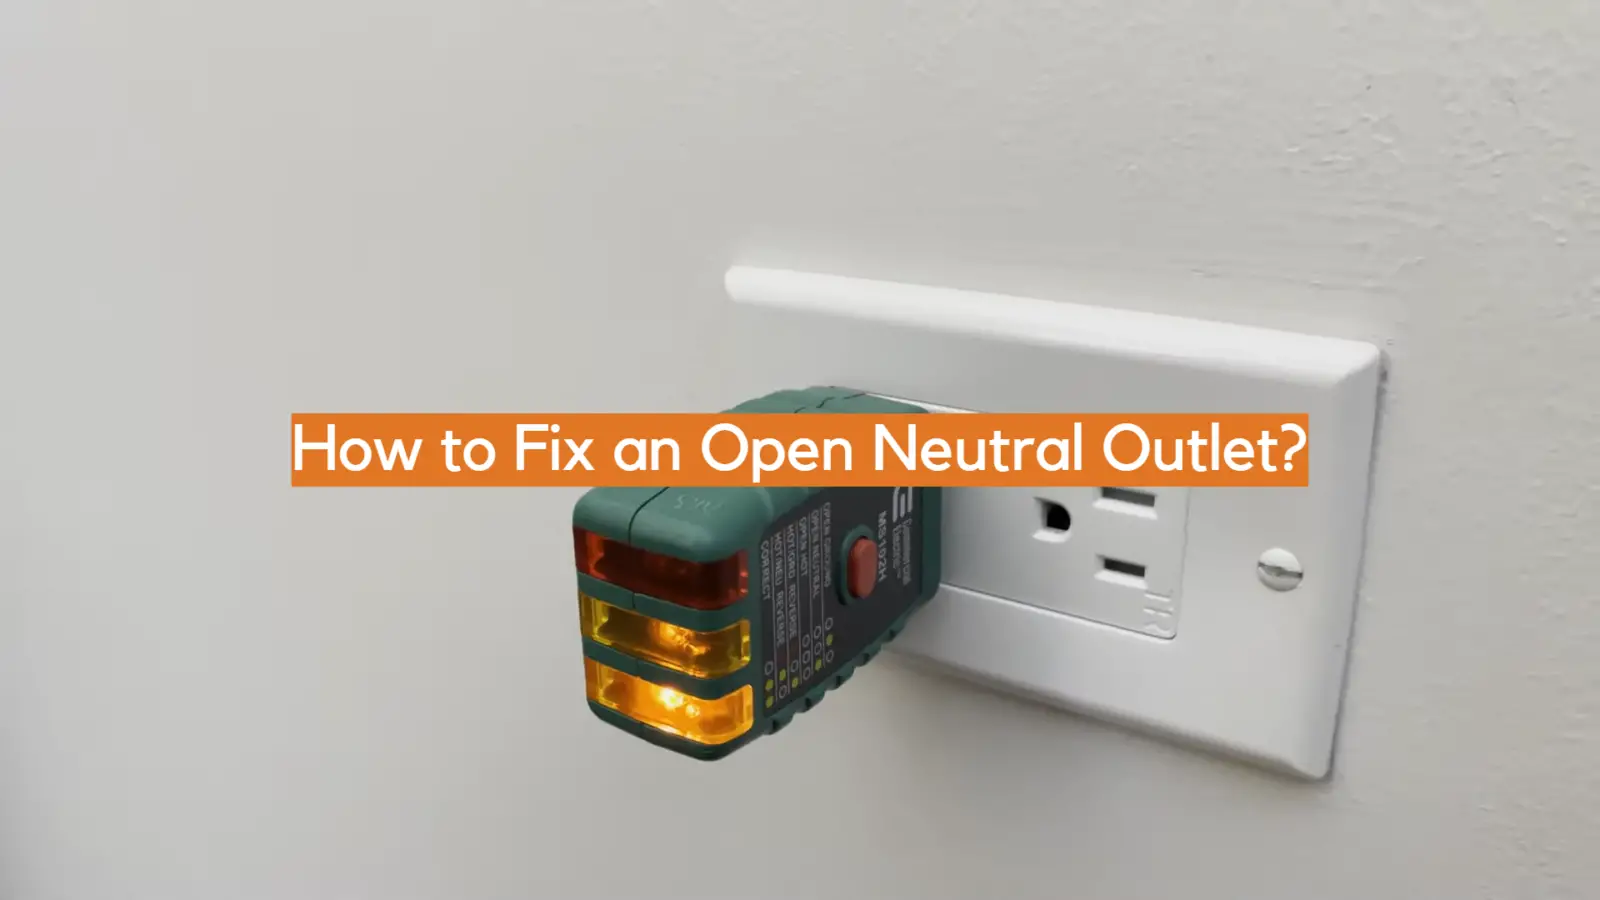 How to Fix an Open Neutral Outlet?